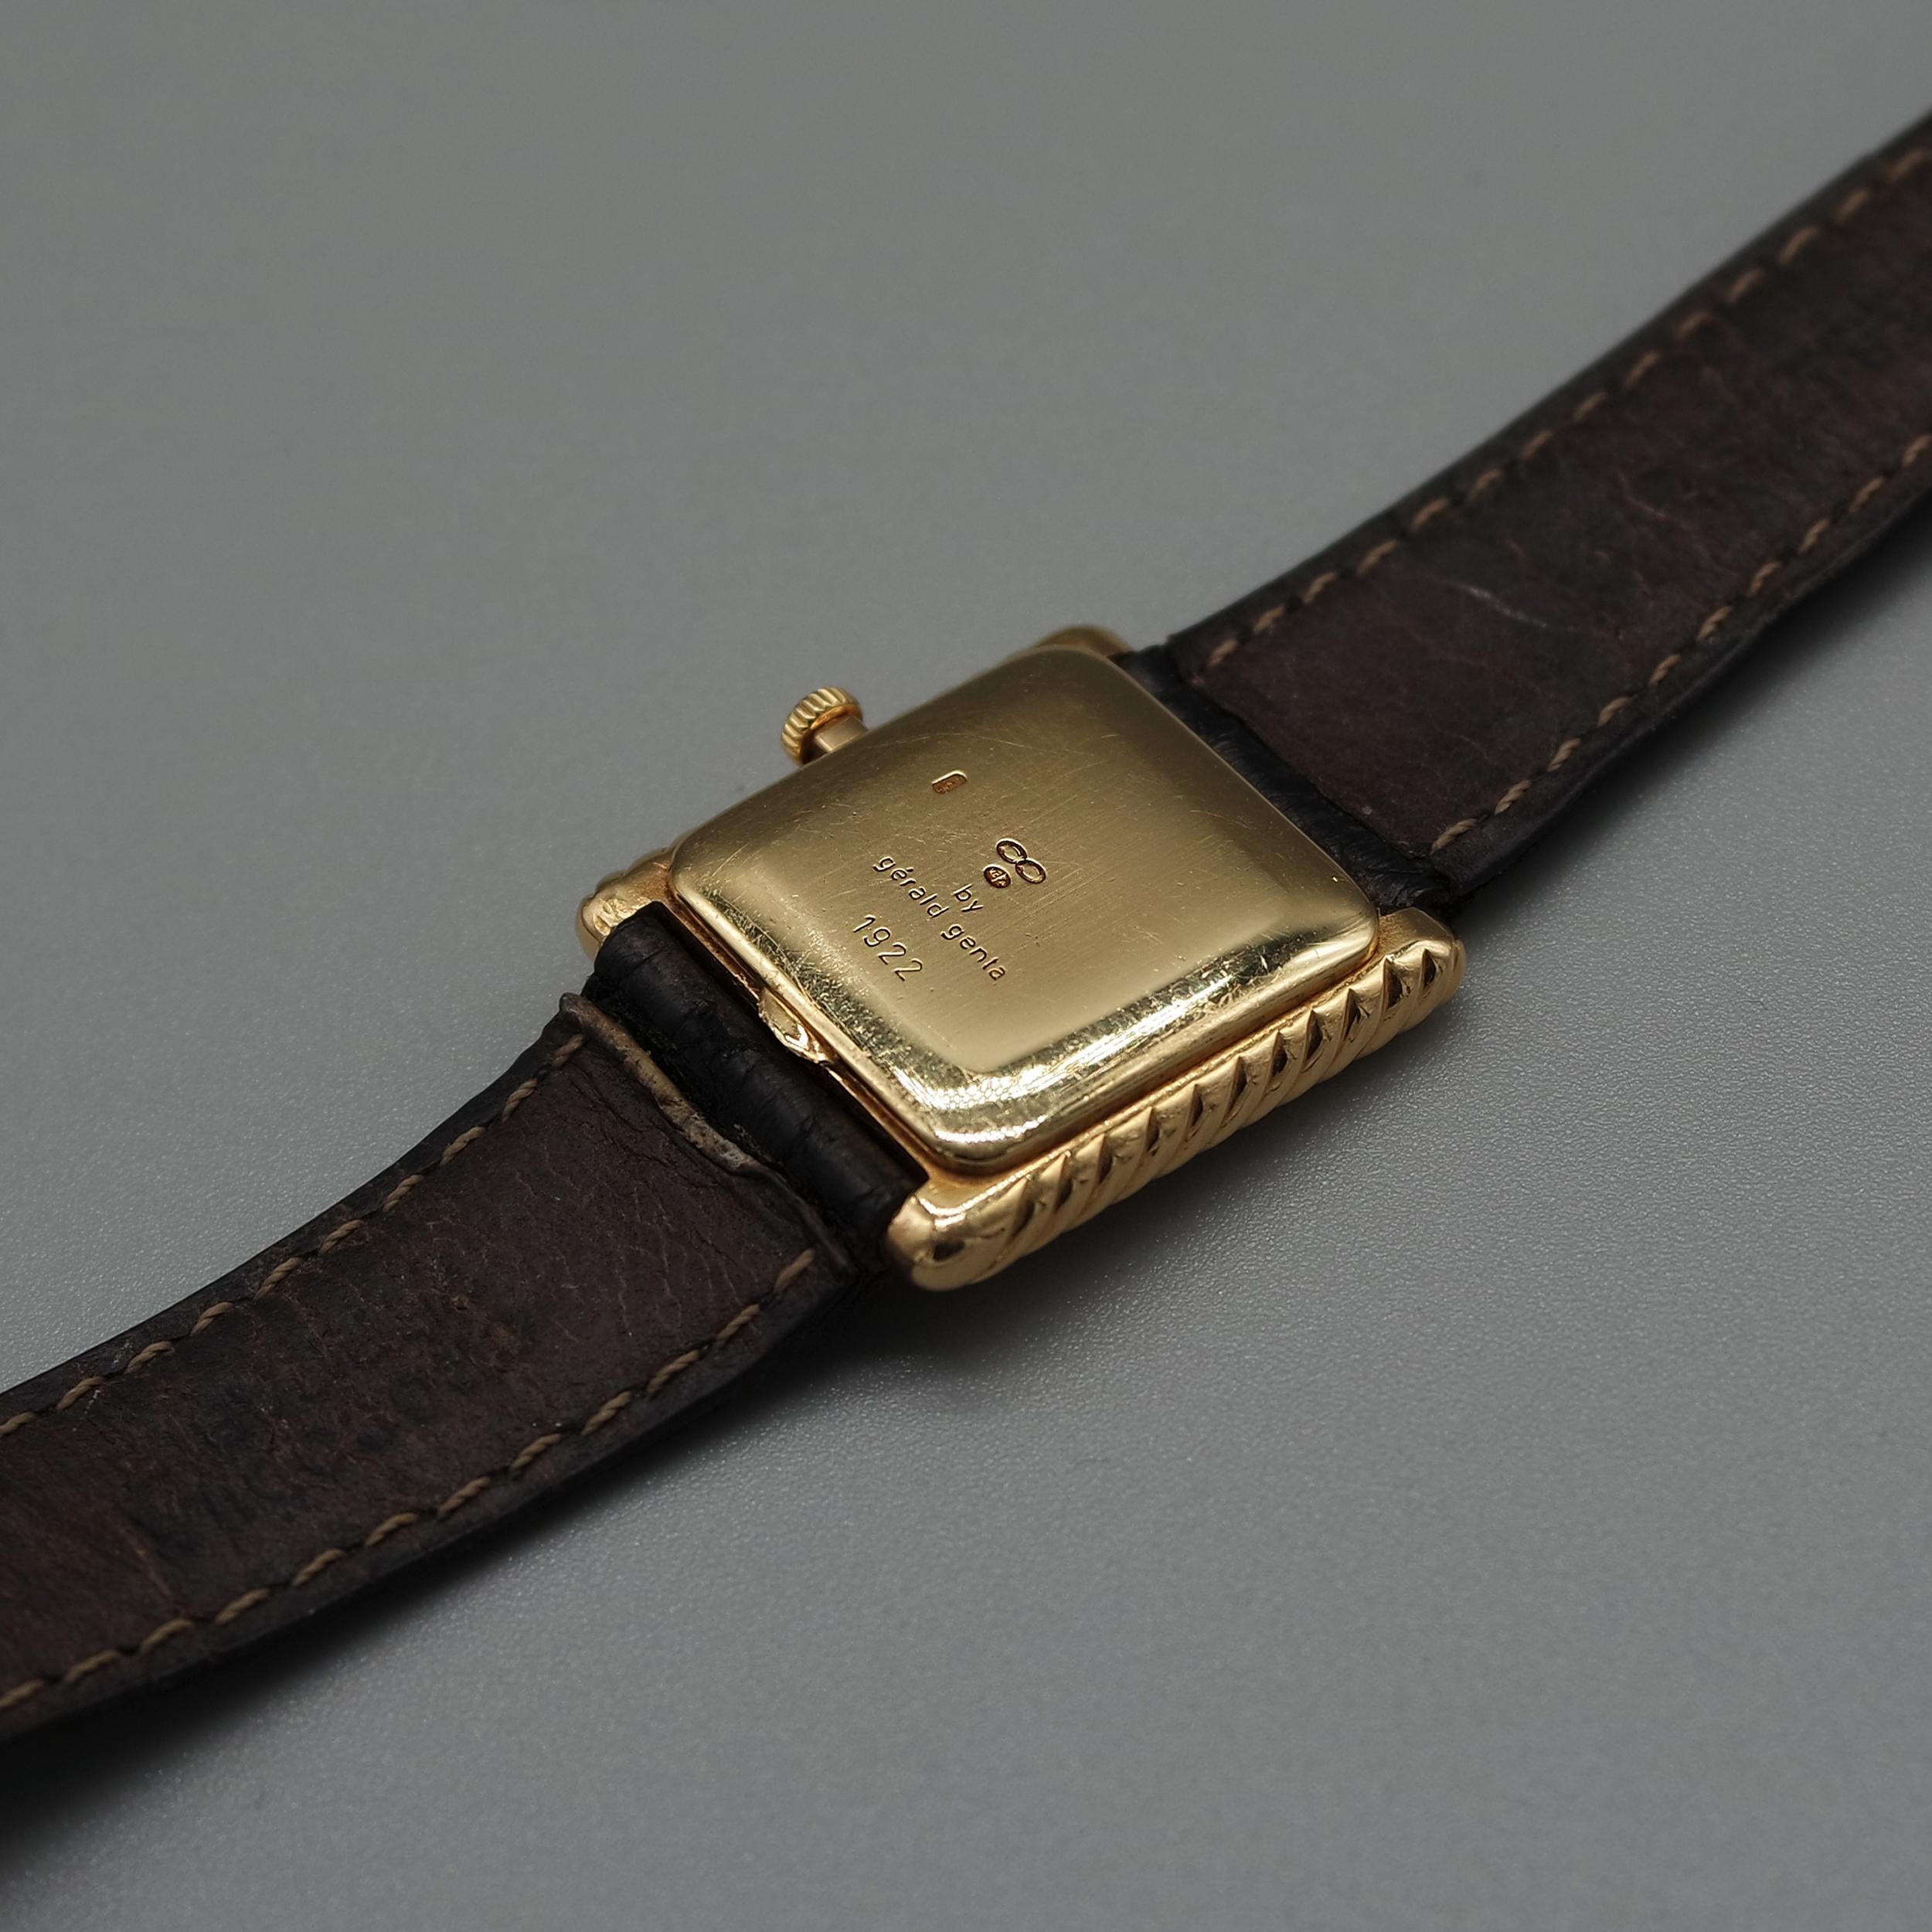 An elegant, classic evergreen and unisex watch 